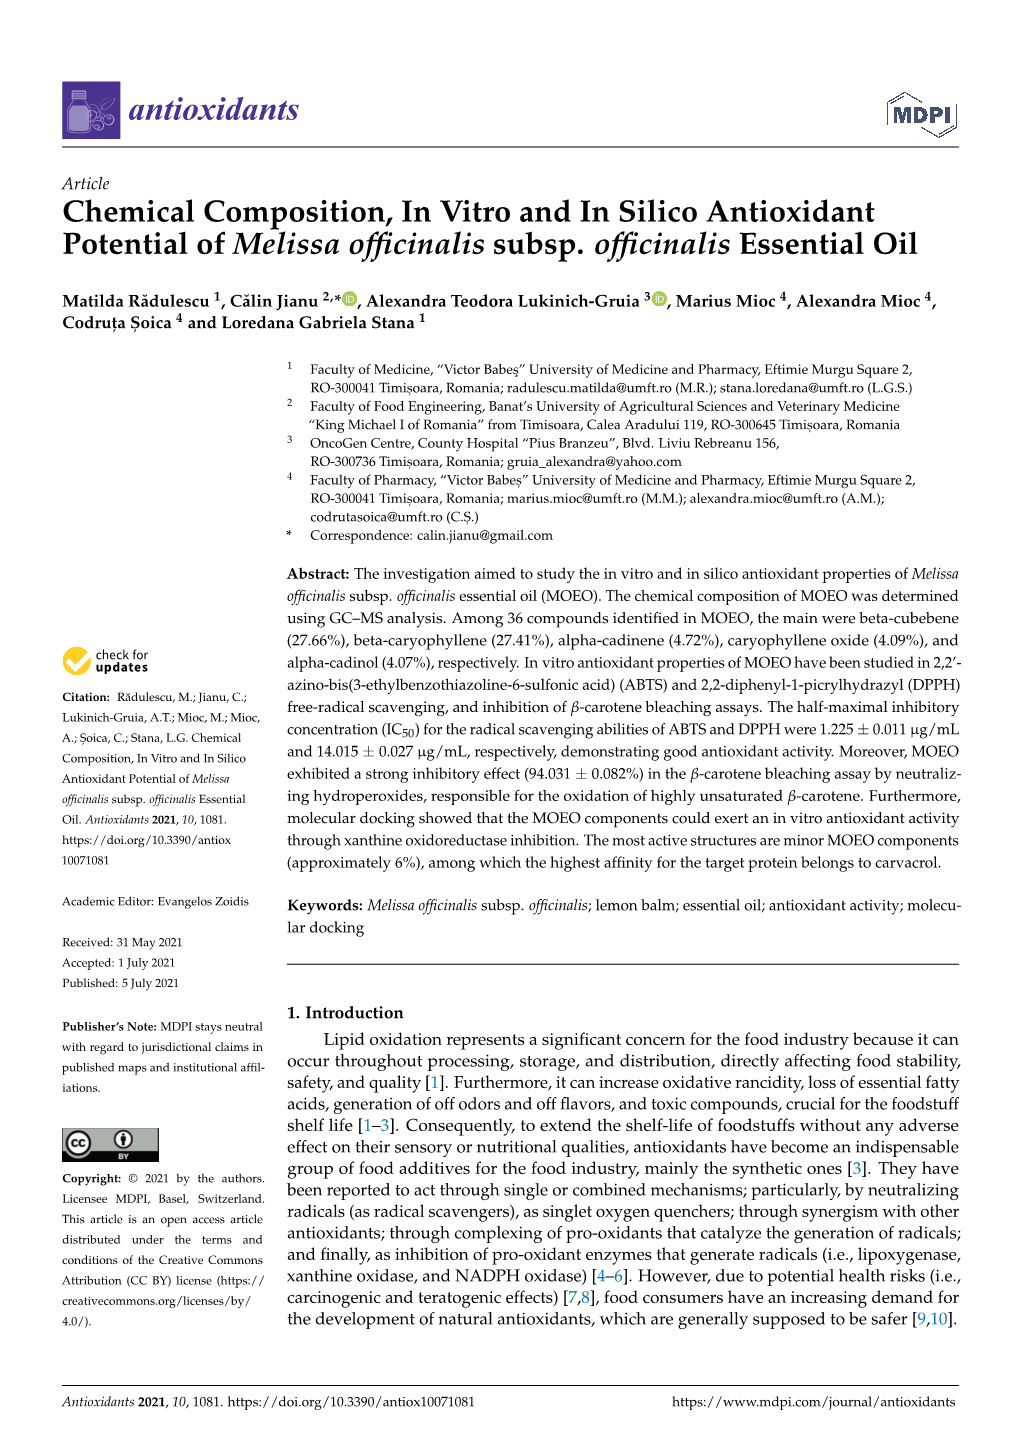 Chemical Composition, in Vitro and in Silico Antioxidant Potential of Melissa Officinalis Subsp. Officinalis Essential